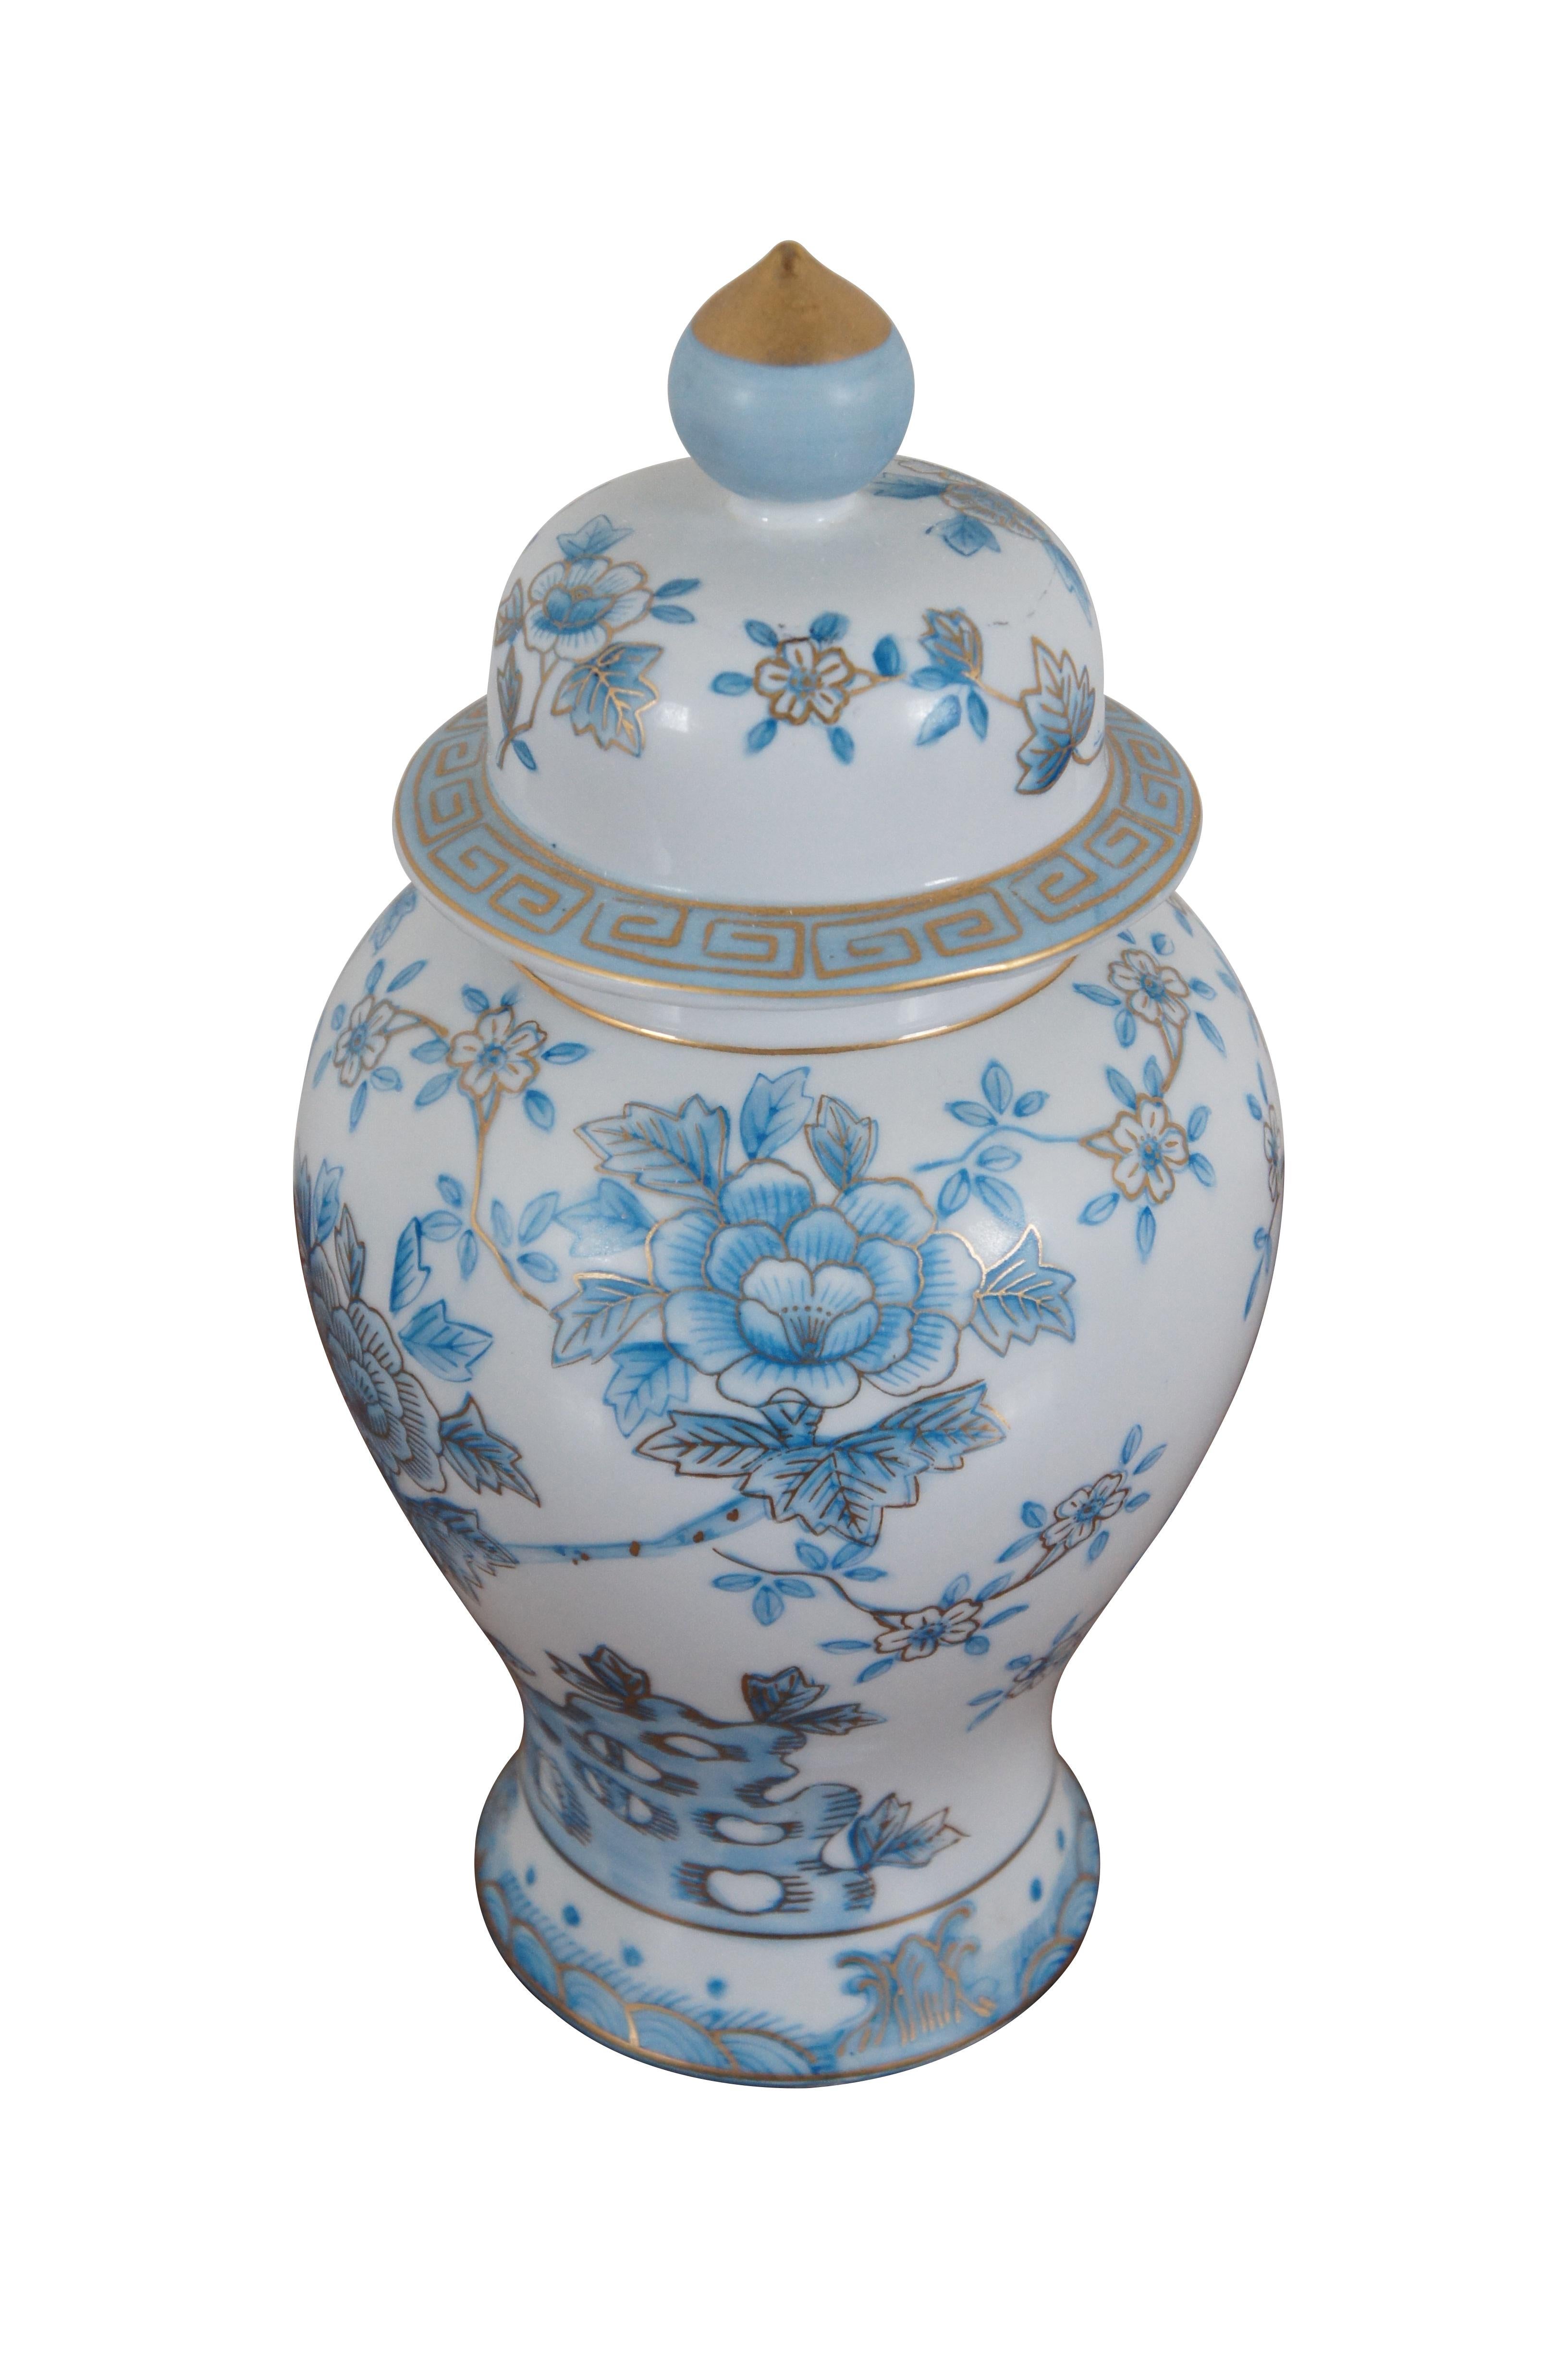 Vintage blue and white porcelain ginger jar / temple jar / lidded urn decorated with an array of flowers and branches with gilded details. Made in Japan. Marked with a gold triangle.

Dimensions:
6.25